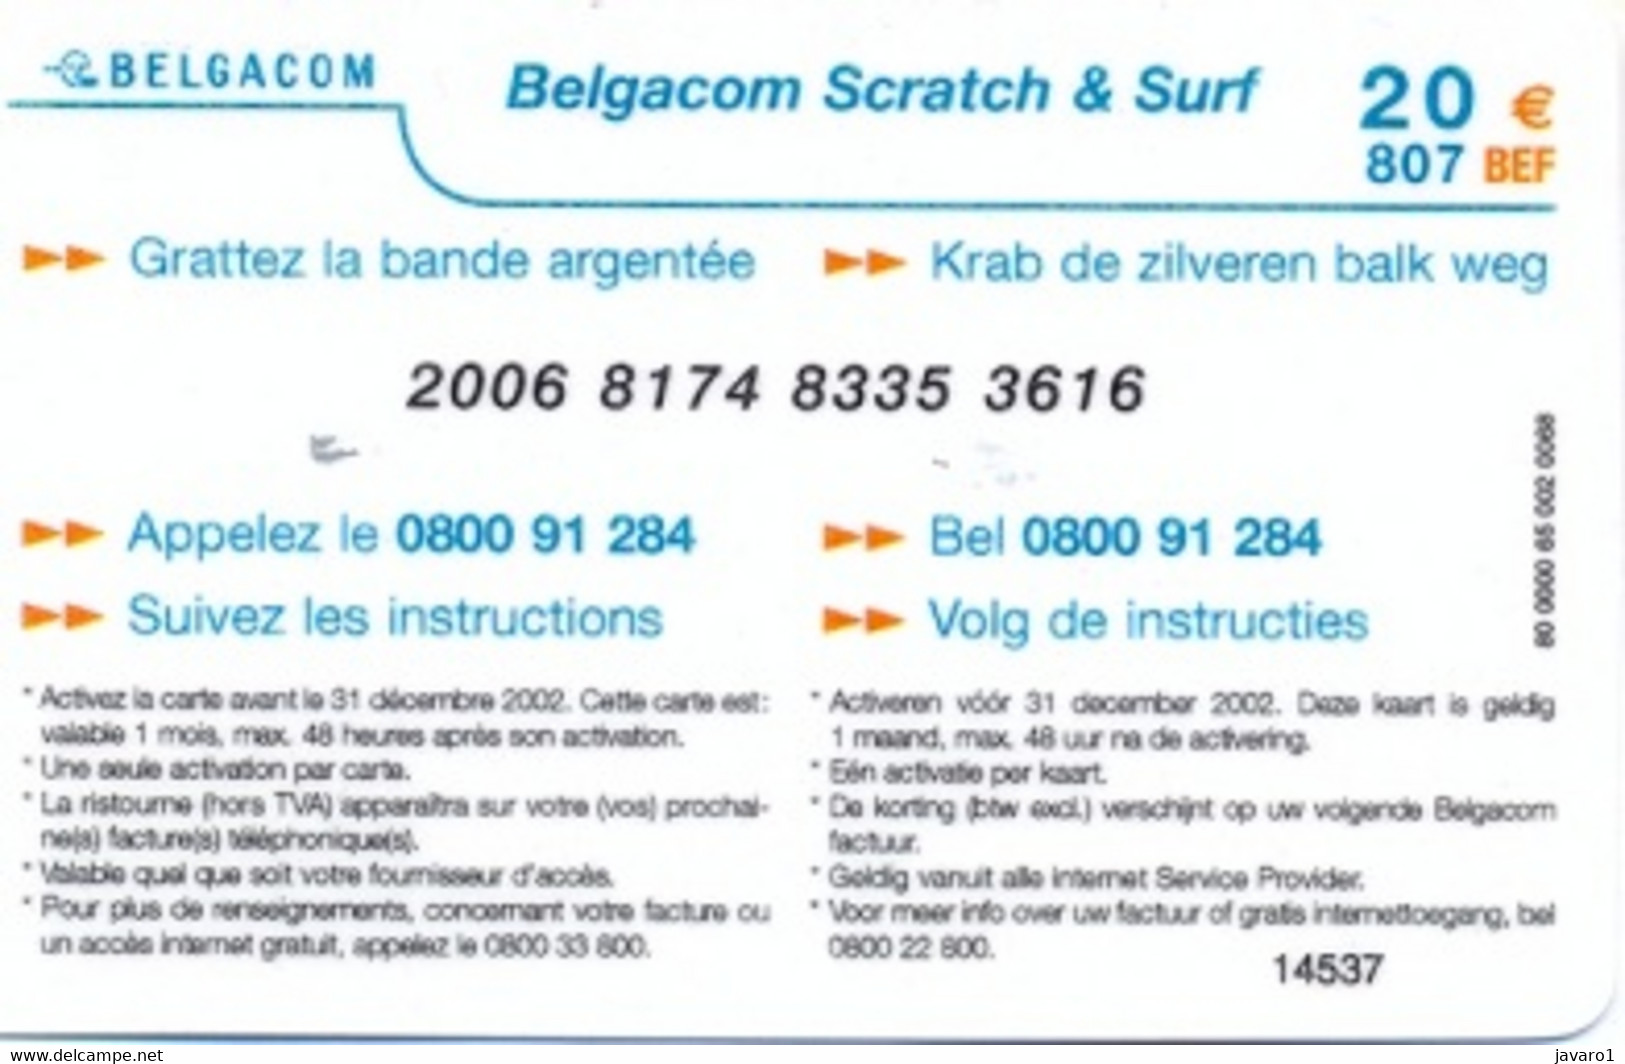 BEL_SURF : BSCR17 20eur/807BEF Carrefour USED Exp: 31/DEC/2002 - A Identifier